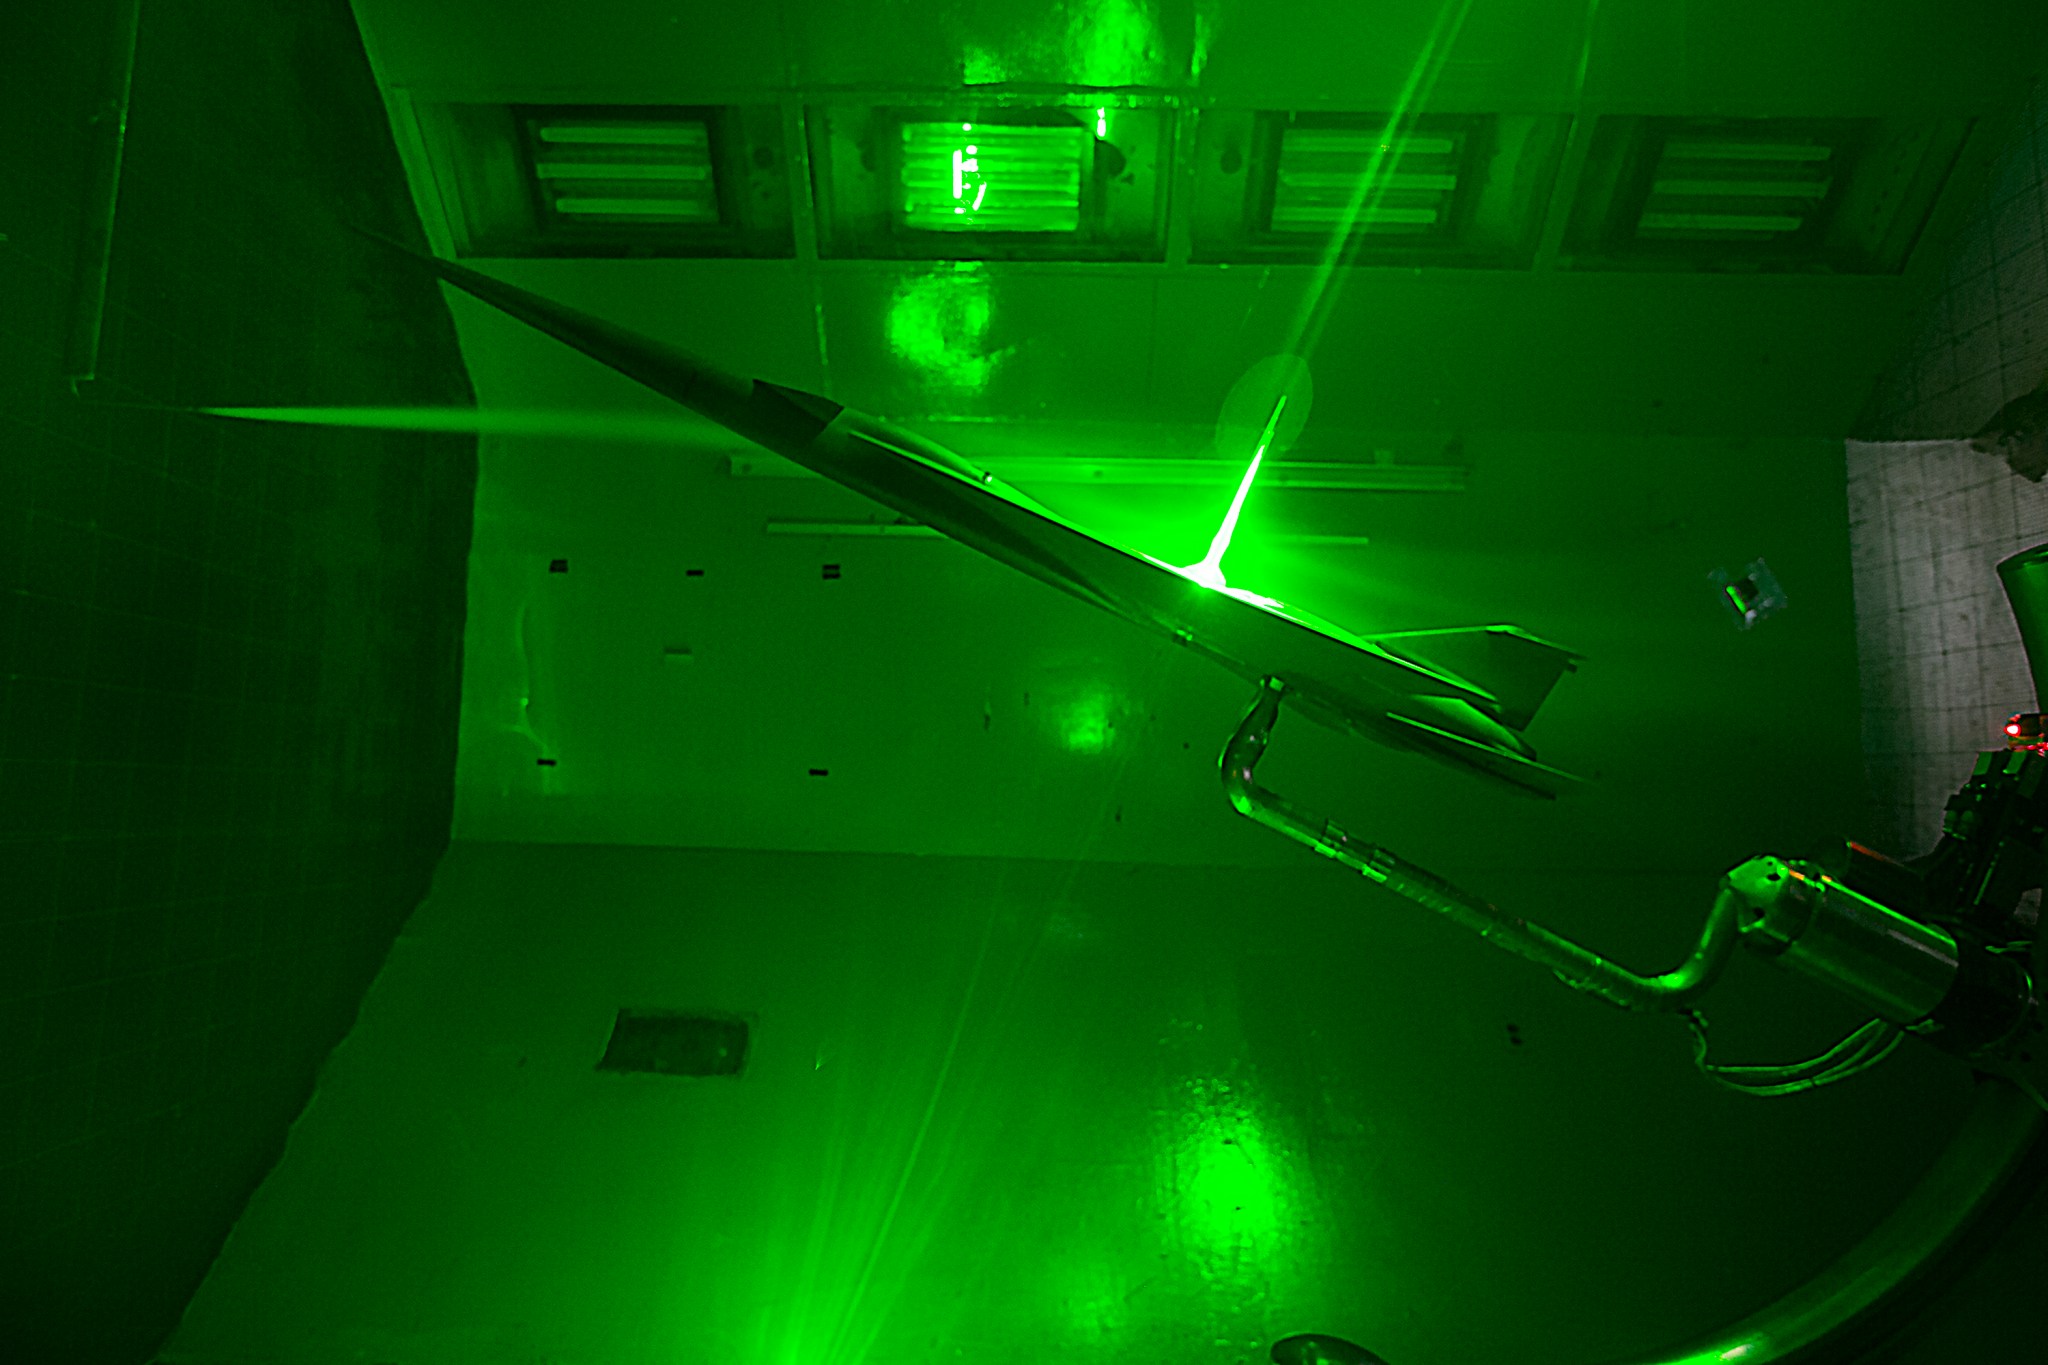 A sub-scale X-59 model undergoes testing in the 12-Foot Low-Speed wind tunnel using smoke and lasers to gather data.